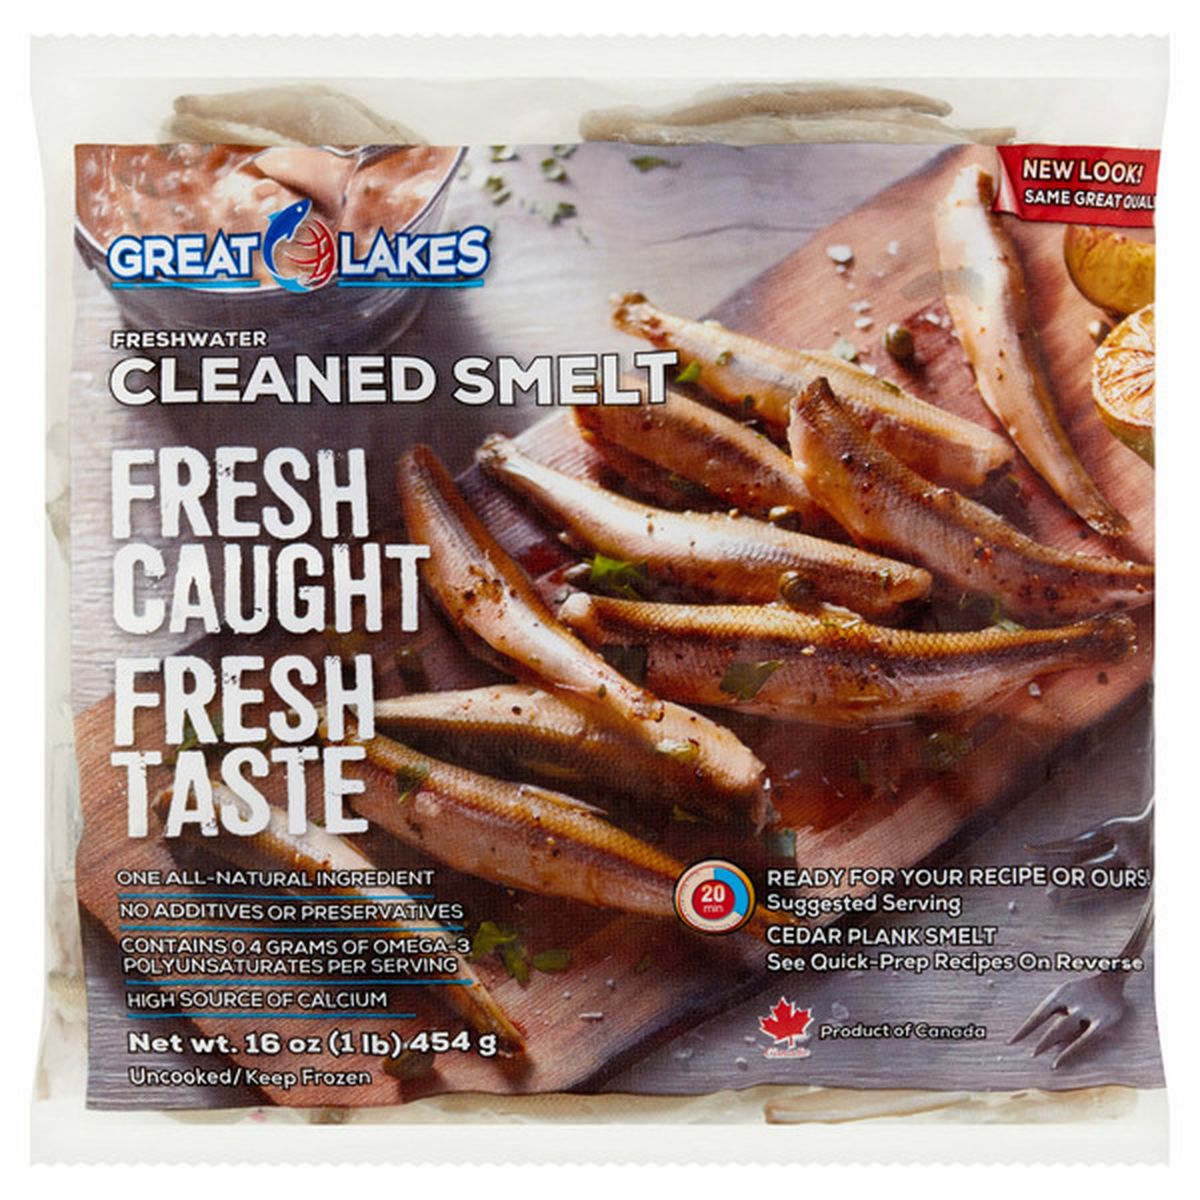 Great Lakes Freshwater Cleaned Smelt (16 oz) Delivery or Pickup